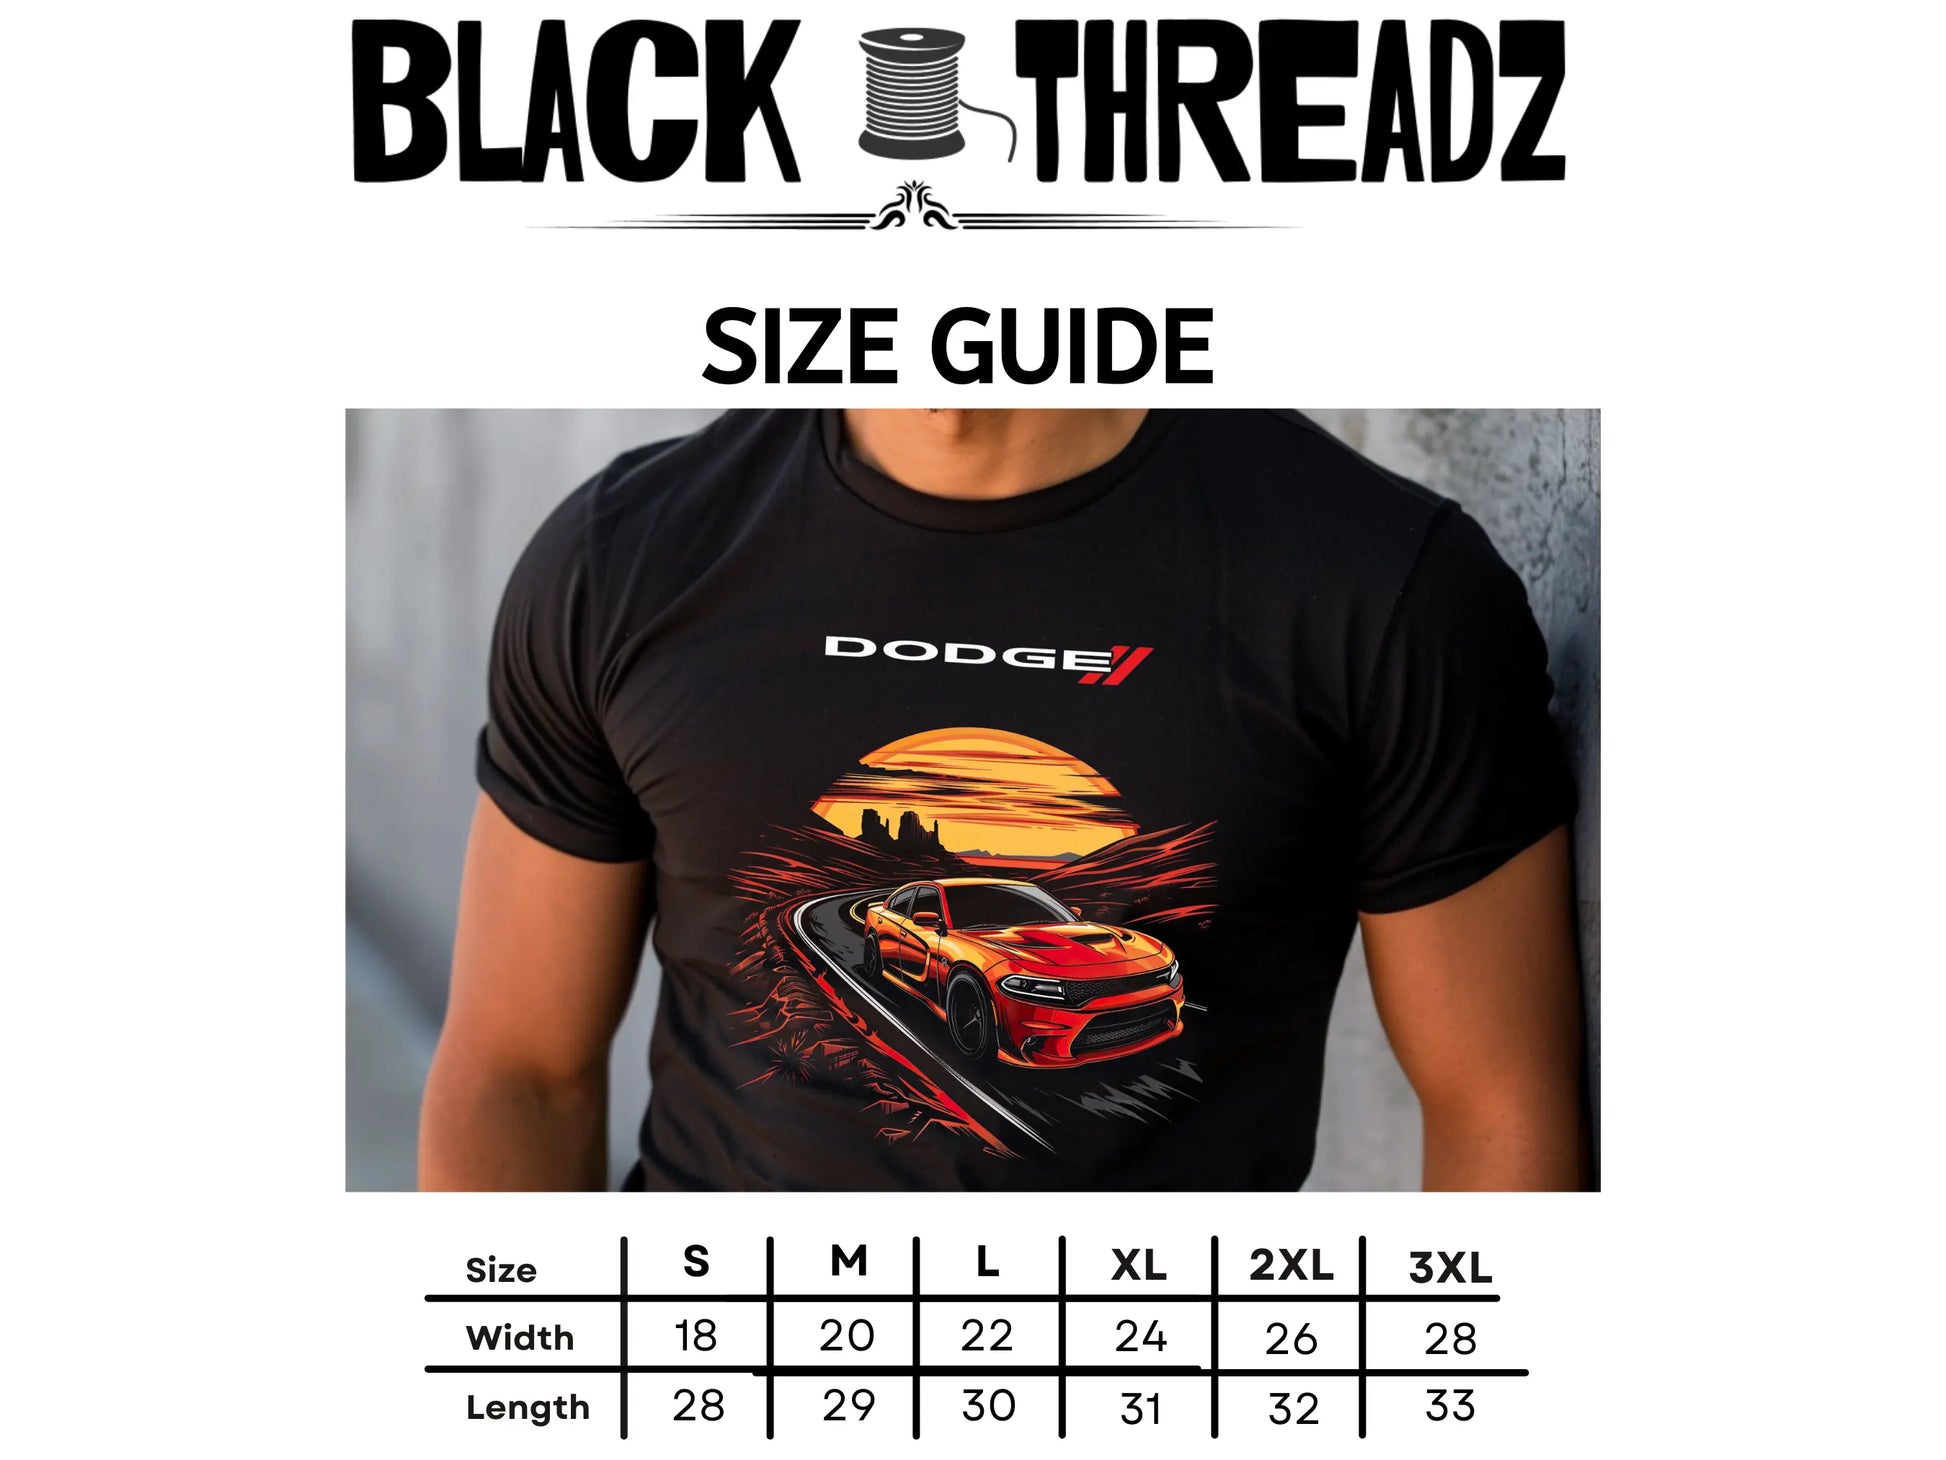 Black Man with Shades T-Shirt: Cool and Confident Style - Black Threadz